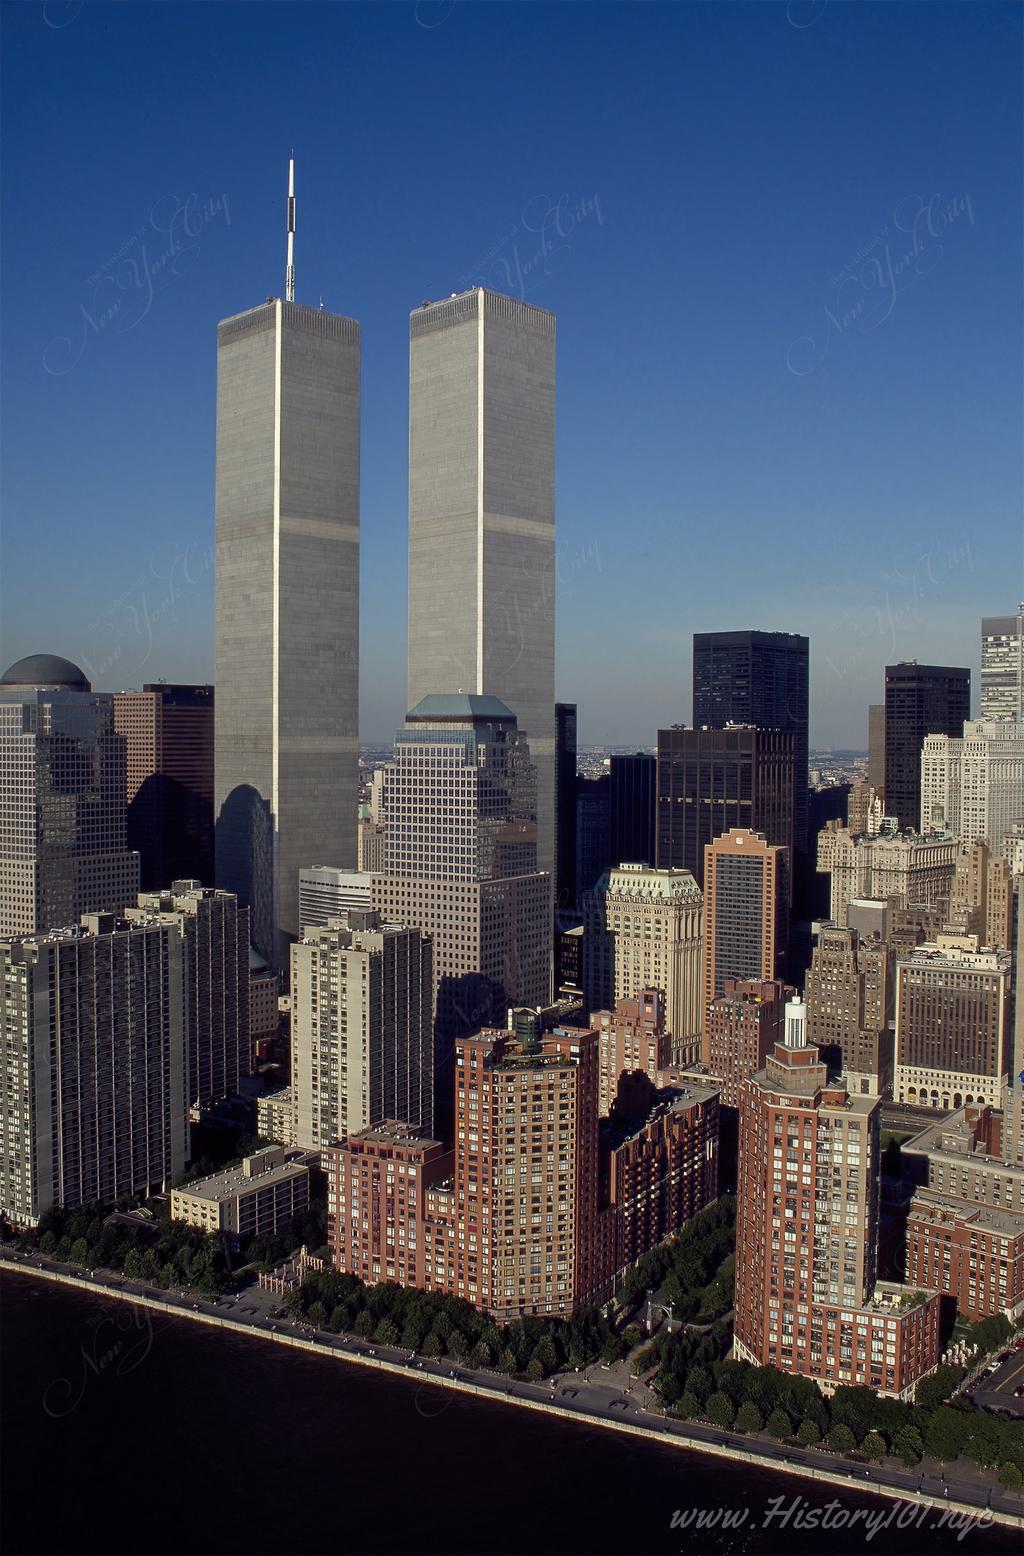 Aerial photograph of World Trade Center Buildings Number 1 and 2, commonly known as the Twin Towers.